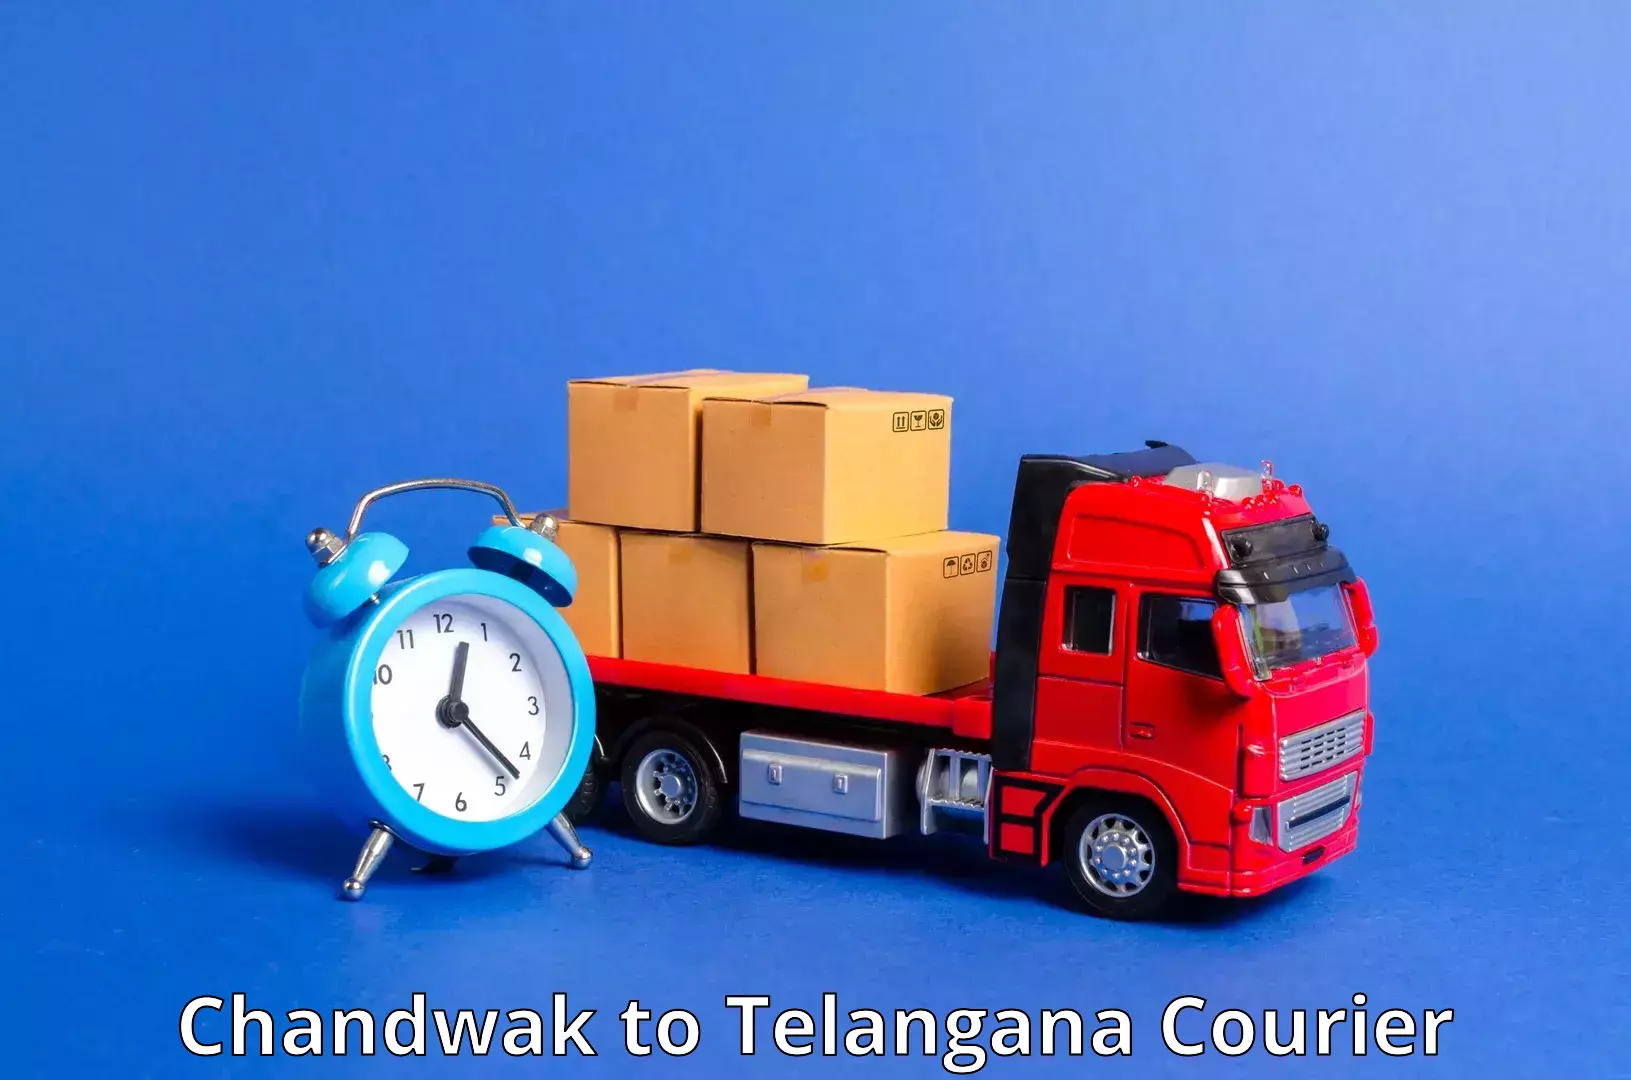 Express package services Chandwak to Nizamabad